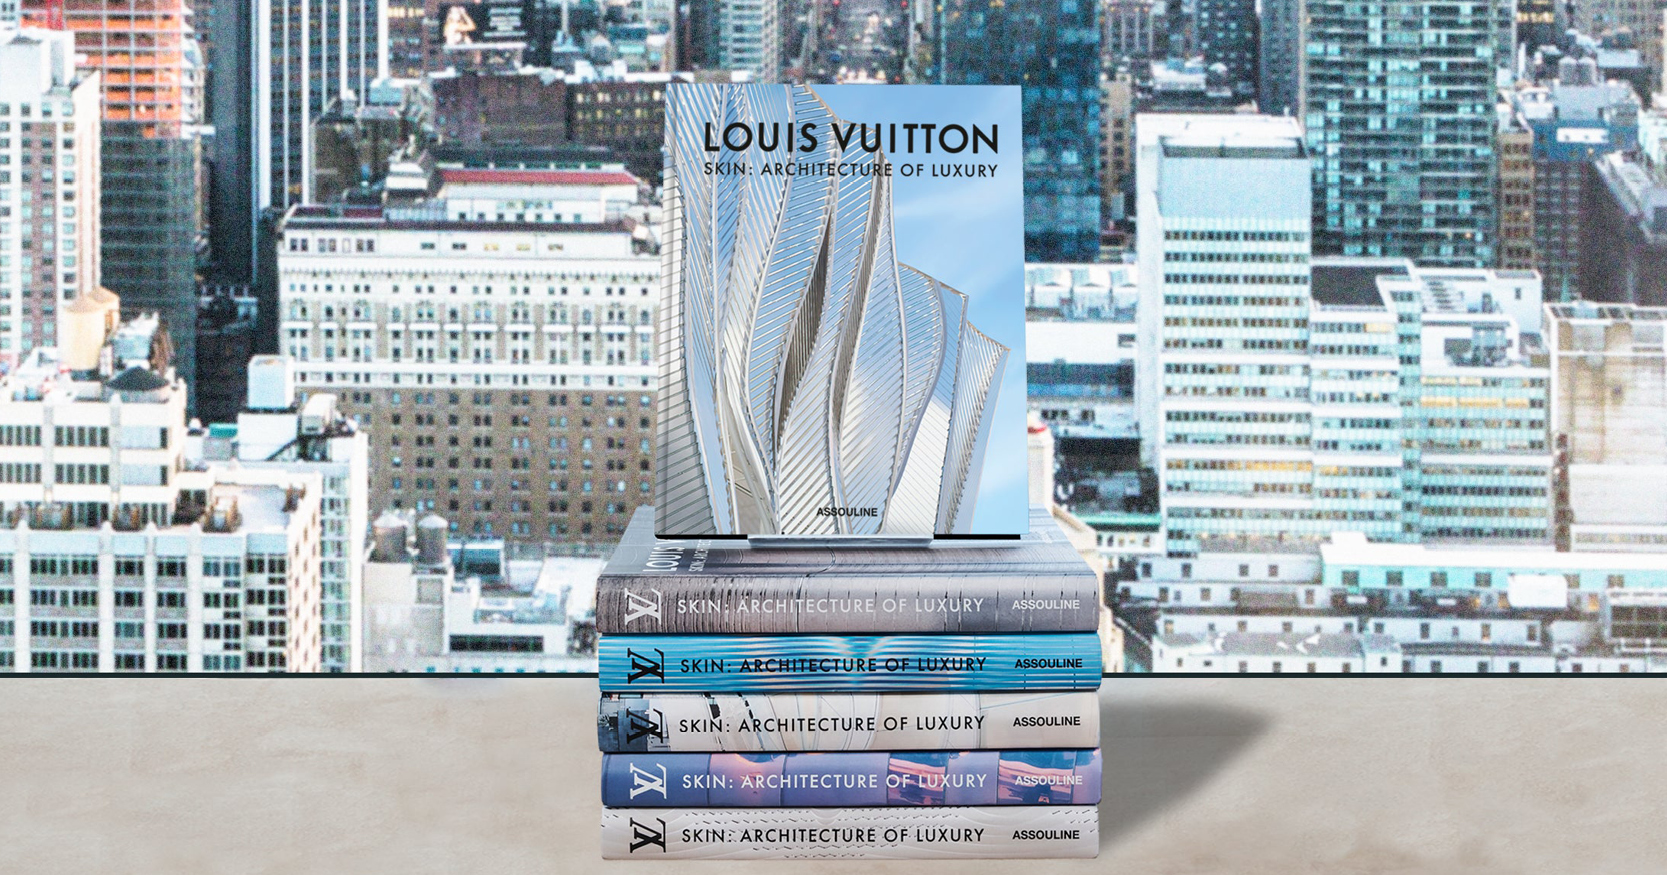 LOUIS VUITTON SKIN: ARCHITECTURE OF LUXURY Coffee Table Book by